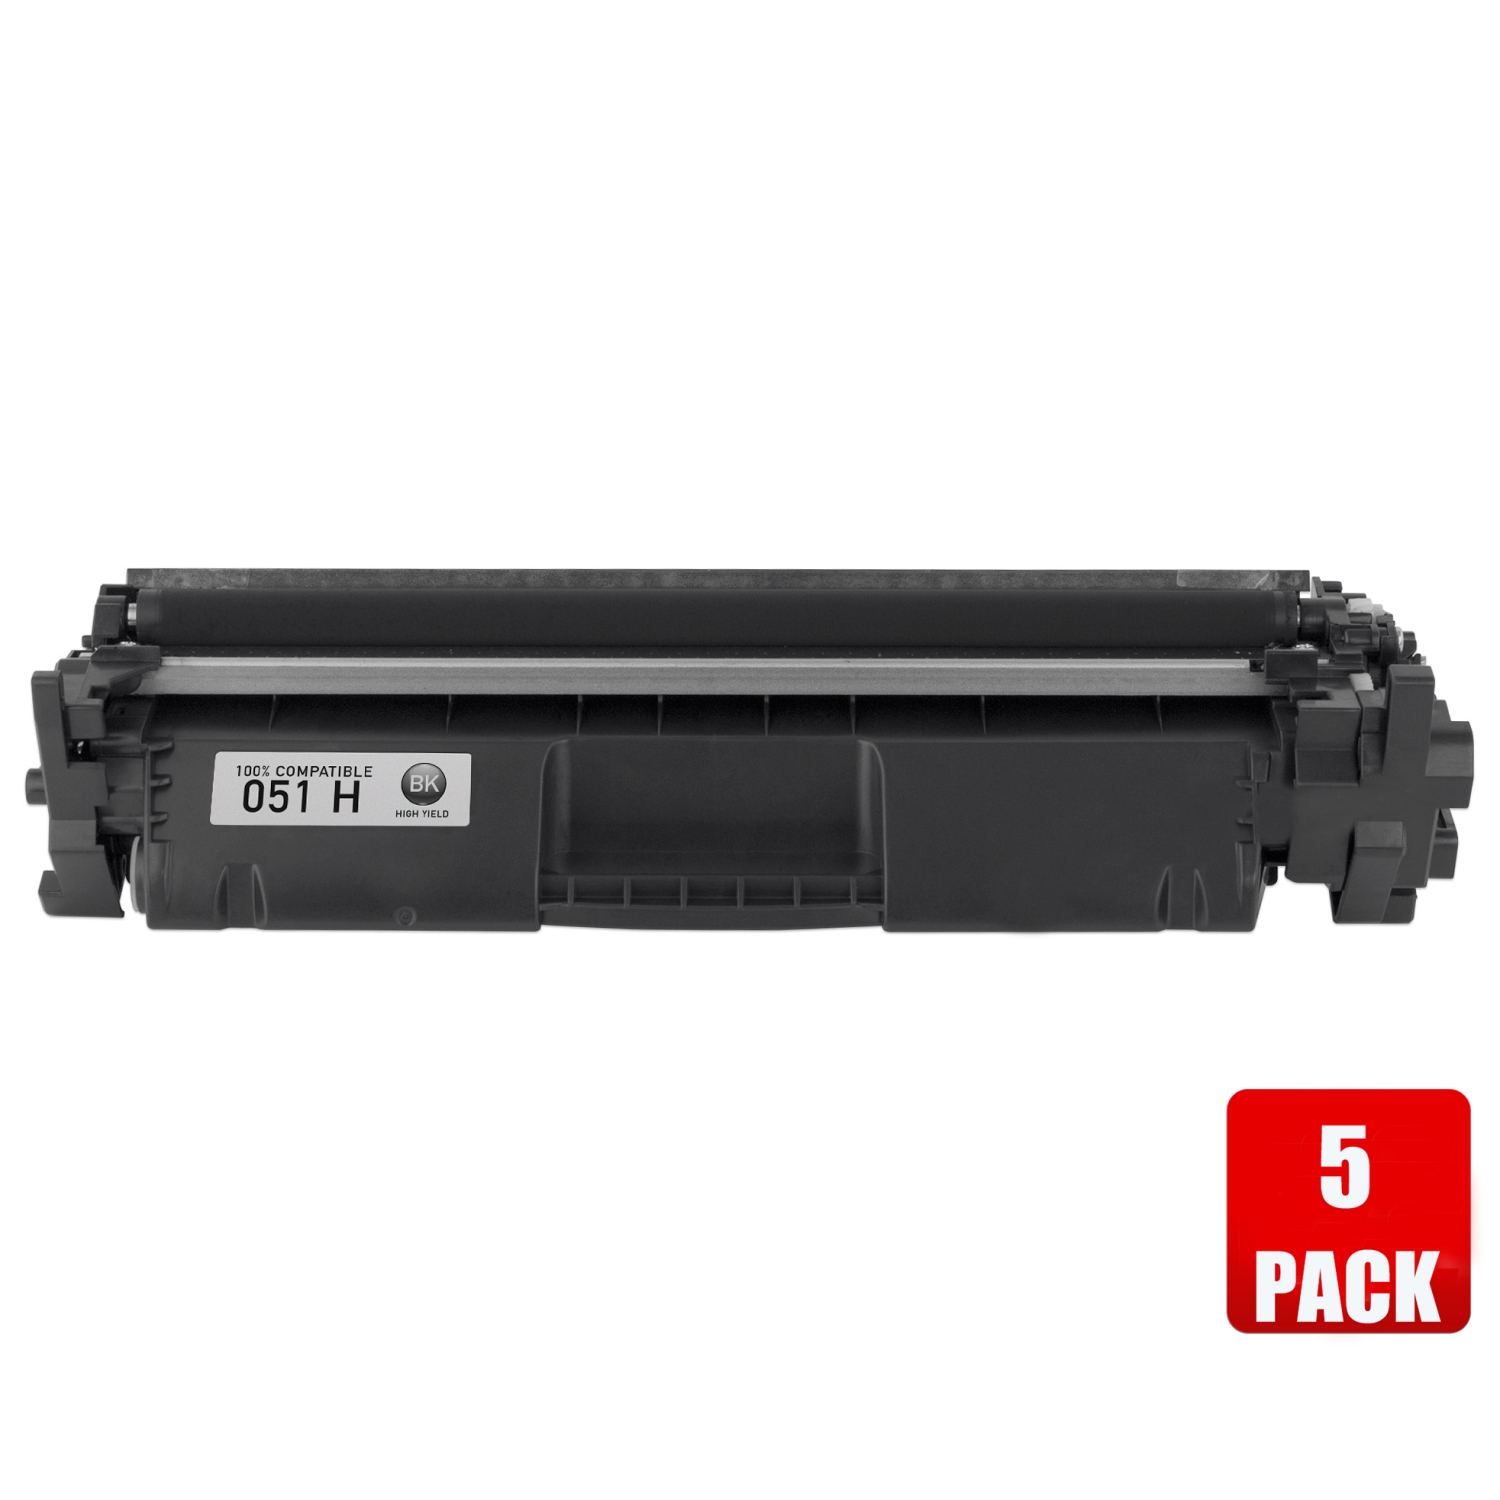 Prime 5 Pack Canon 051H/Canon-051H/051/051H High Yield Black Compatible Toner Cartridge # FREE SHIPPING